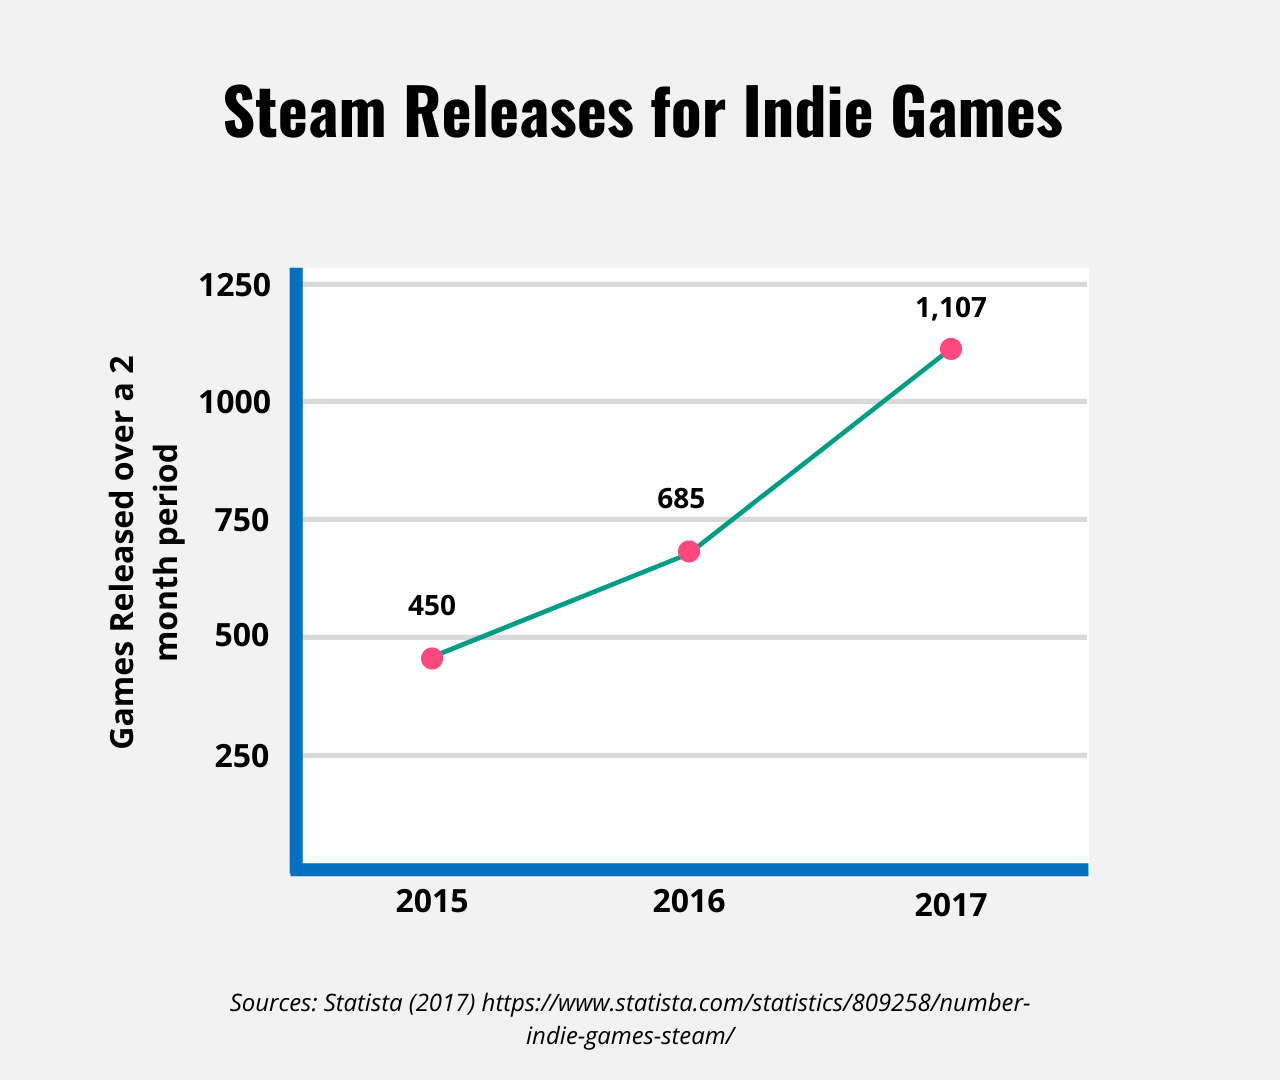 Line chart showing increase in Steam releases from 2015 - 2017